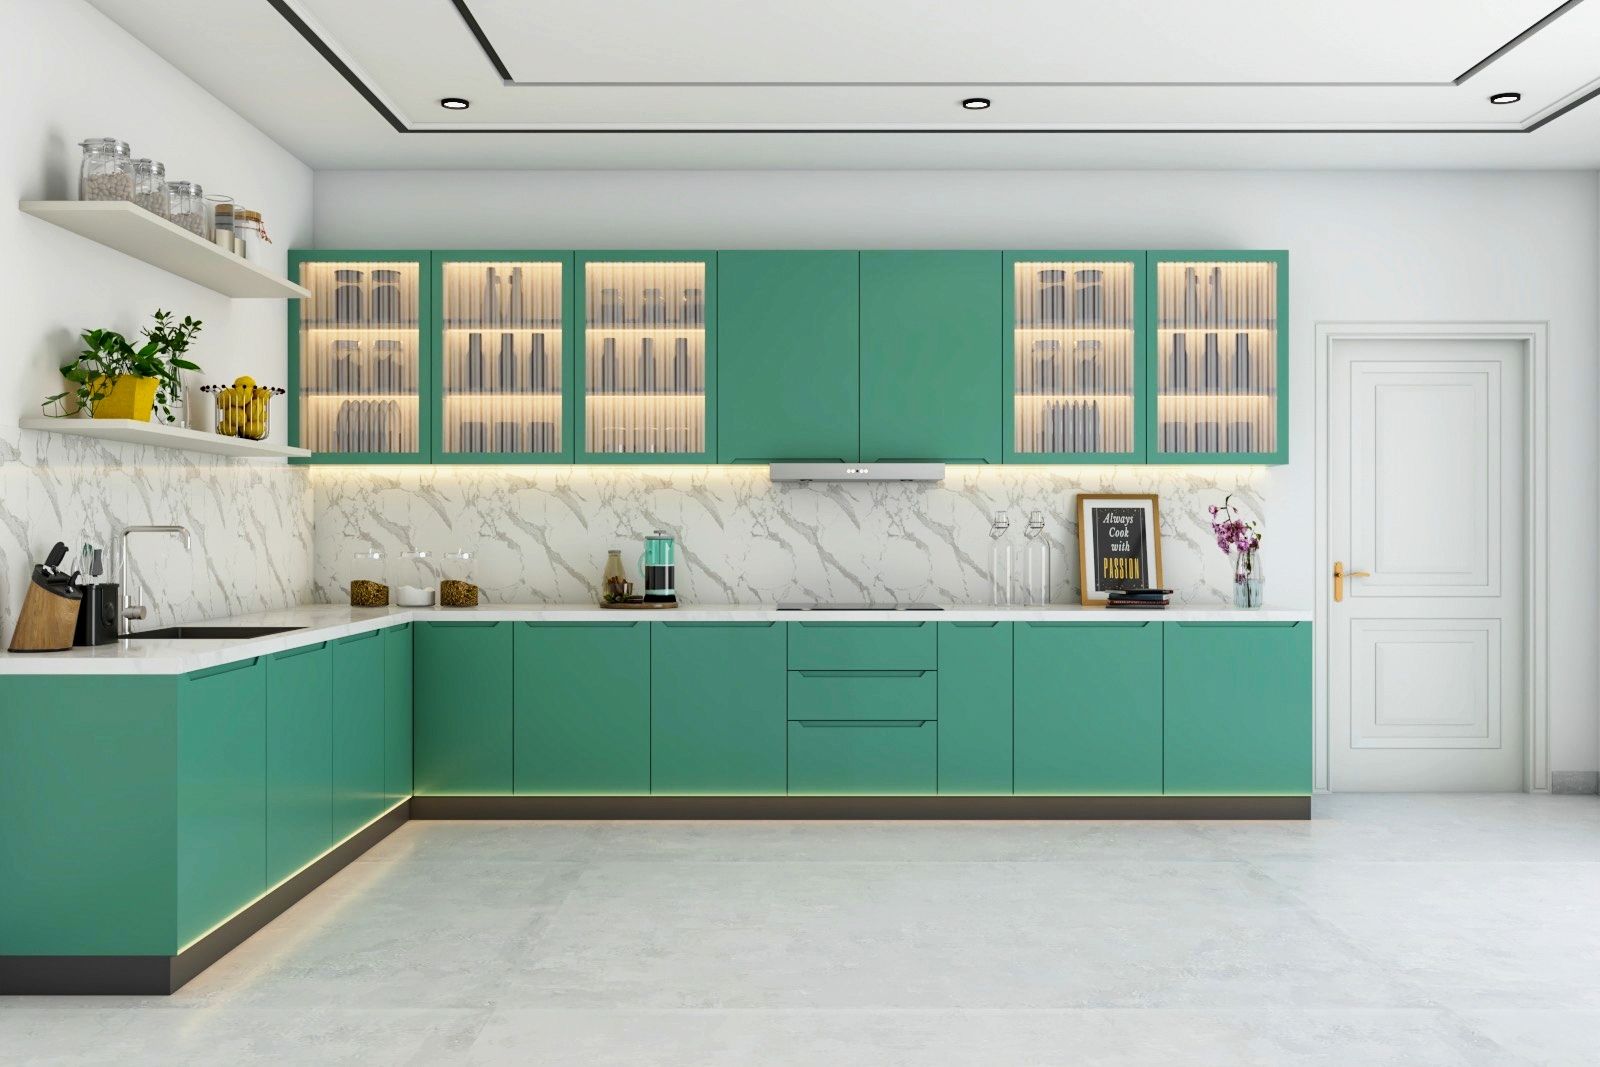 Modern Modular L-Shaped Kitchen Cabinet Design With Pino Tropicale Cabinets And Under-Cabinet Lighting